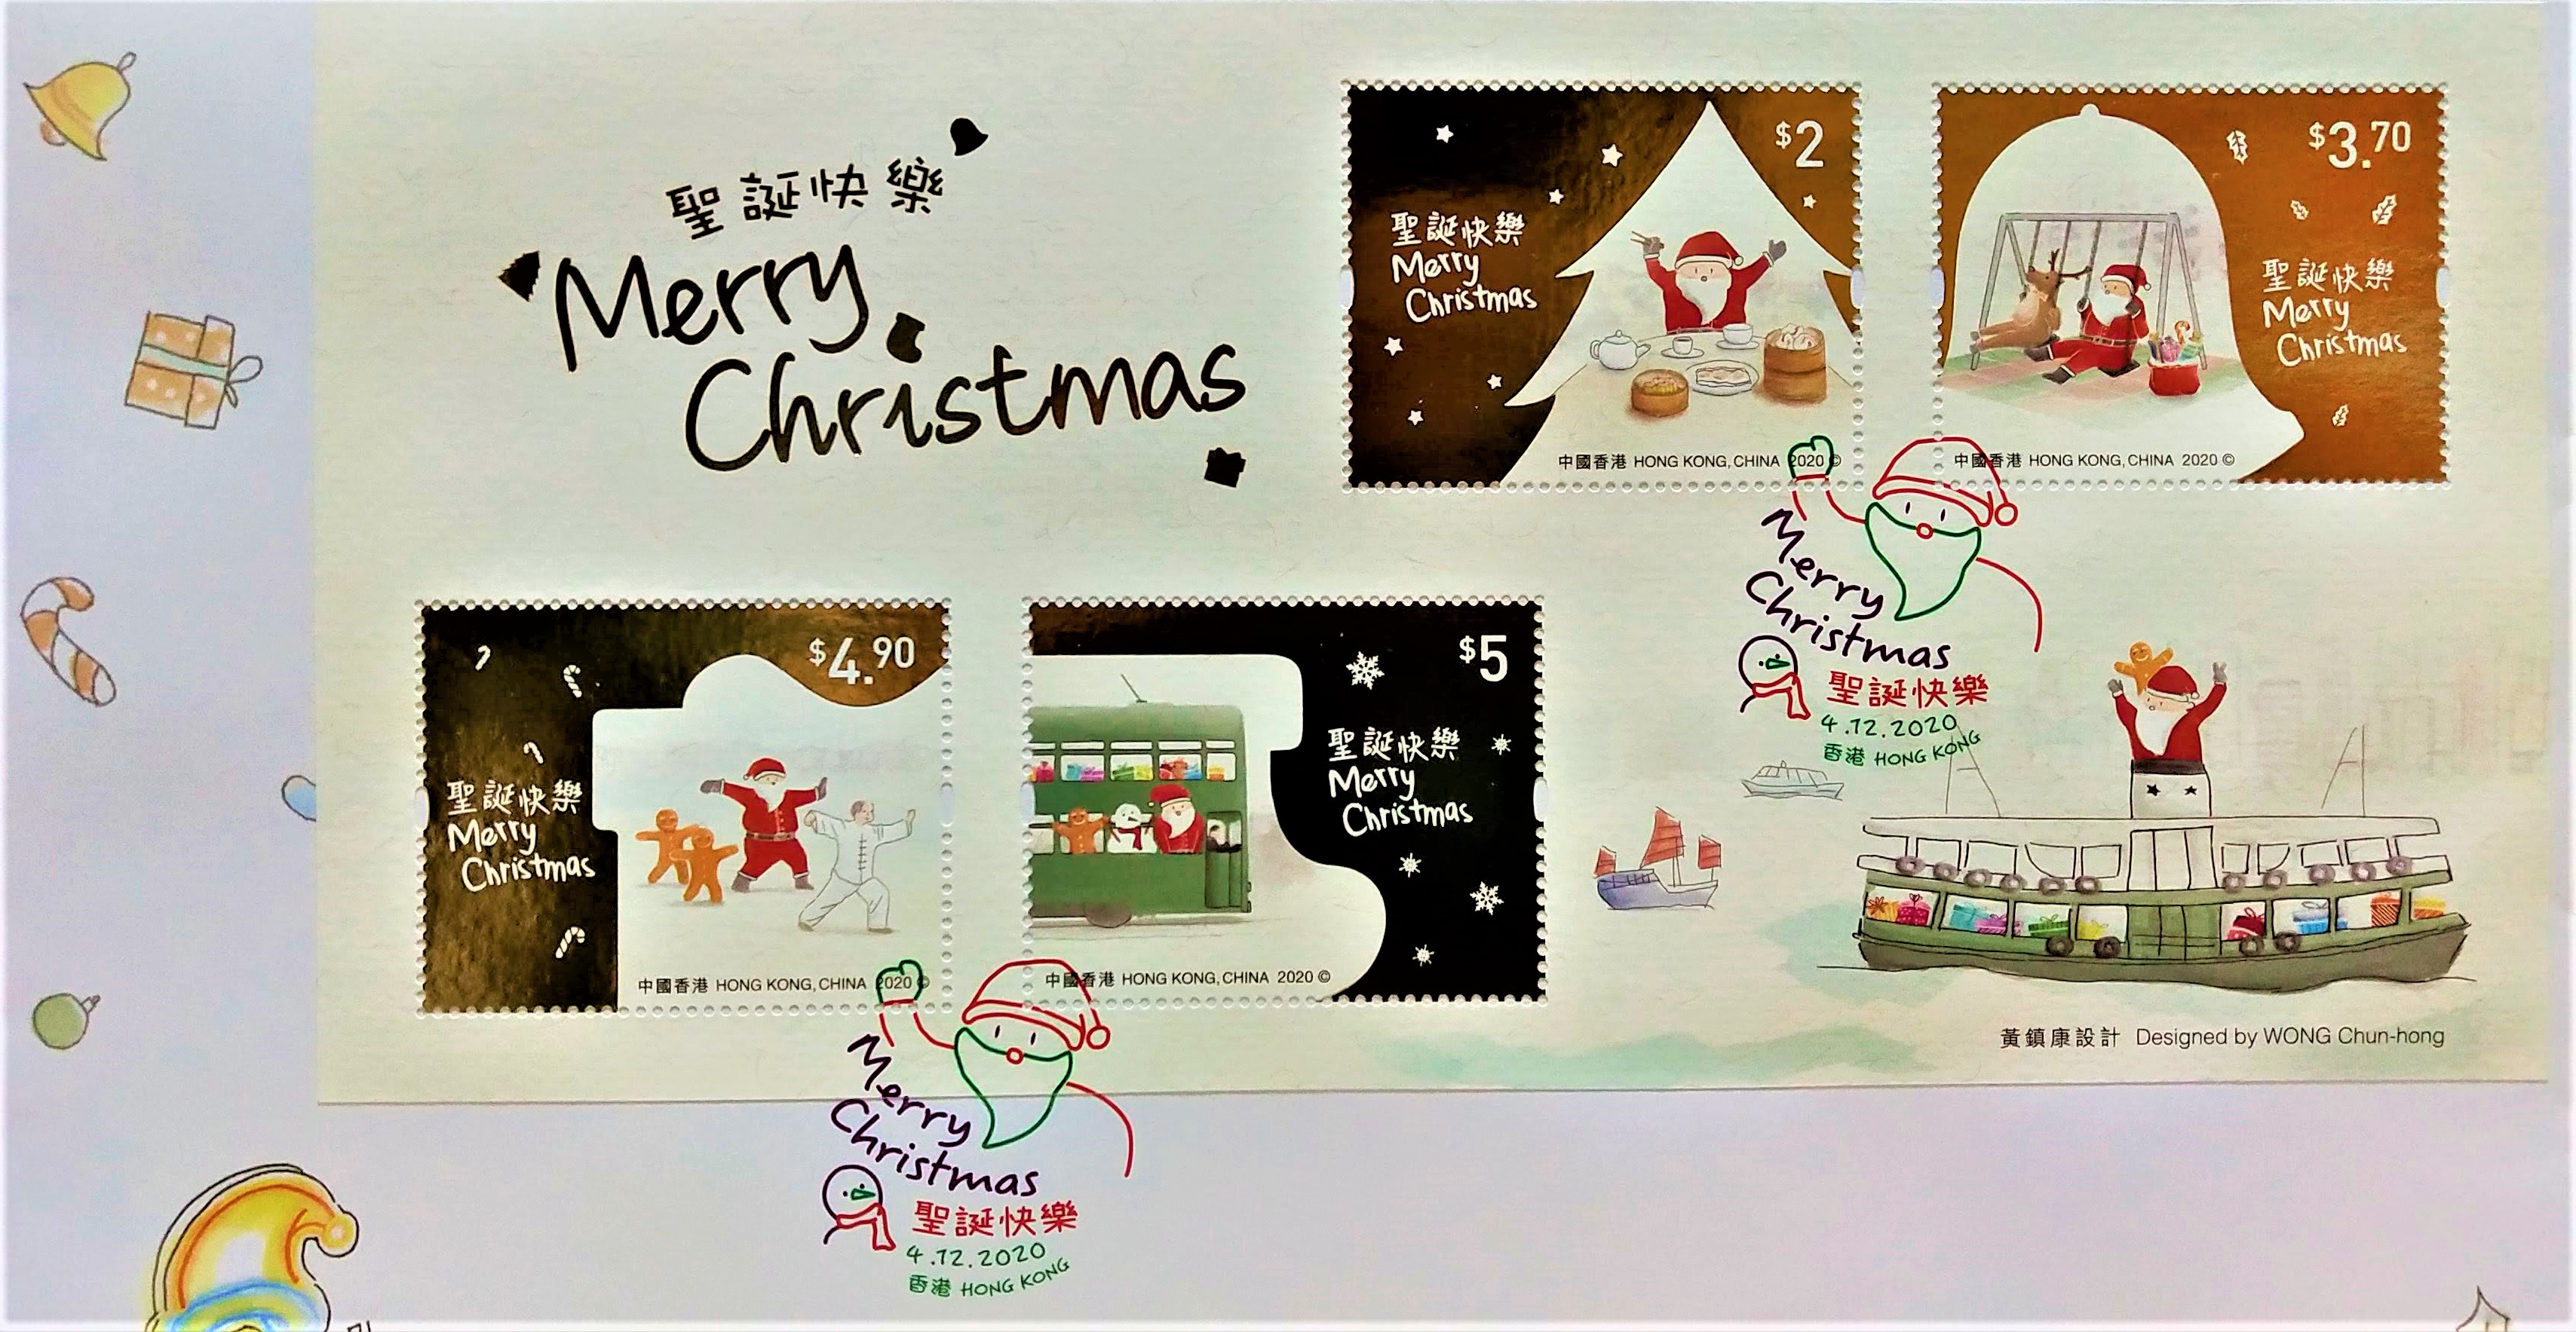 Christmas stamps show Hong Kong working holiday journey of Santa Claus